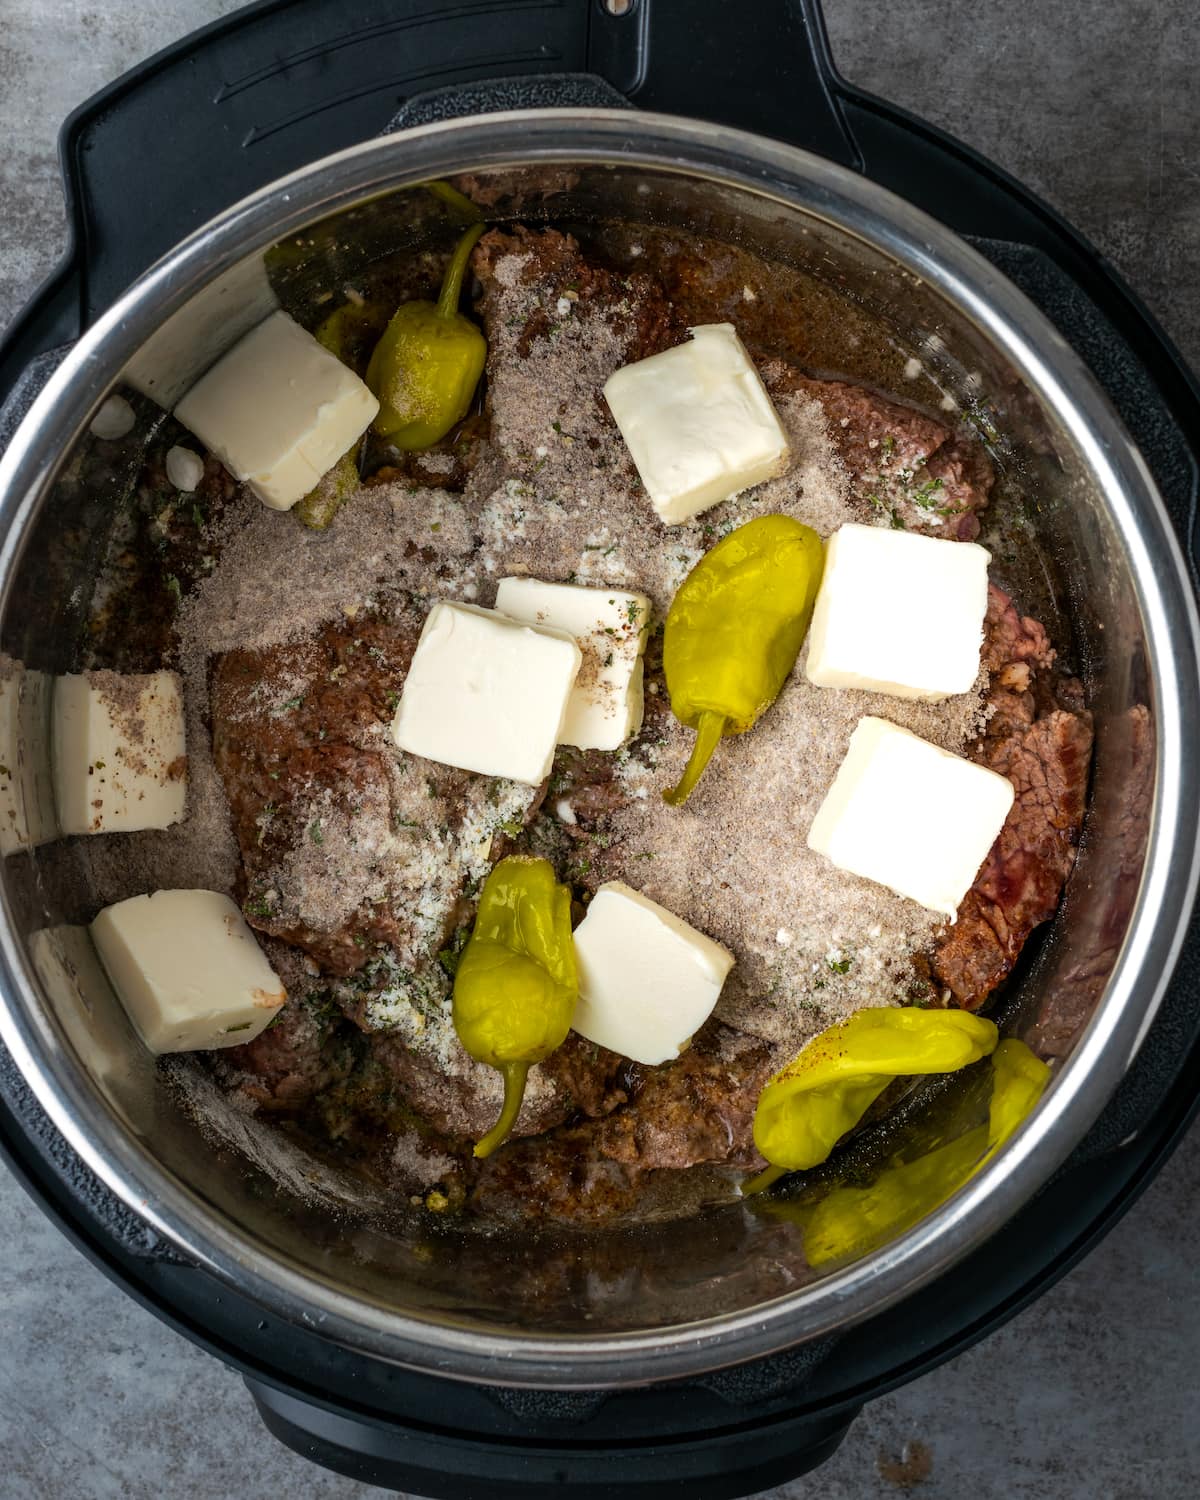 Seasoning, gravy mix, pepperoncini and pats of butter are added over top of the beef inside the Instant Pot.